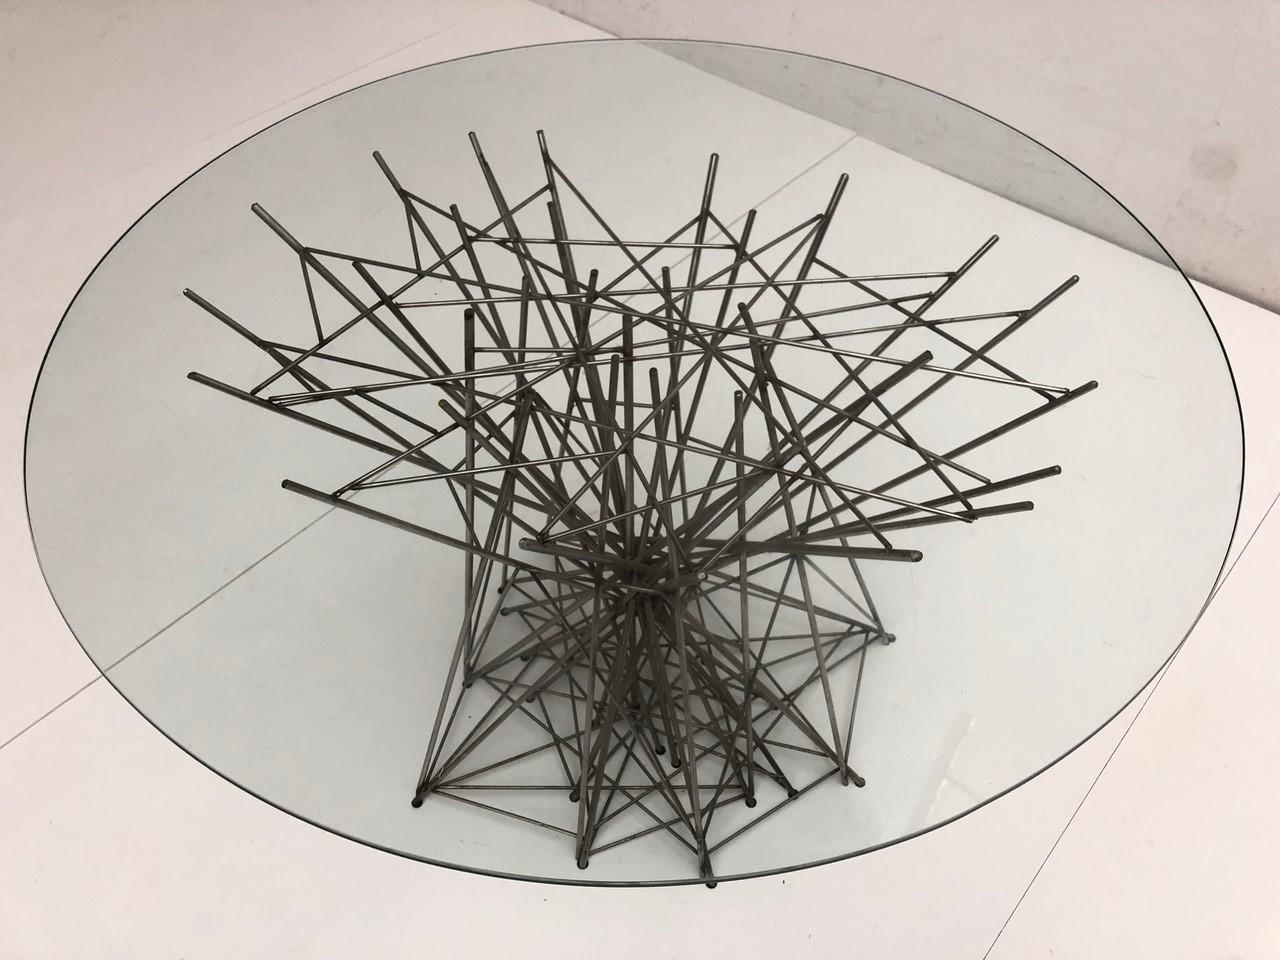 Beautiful, unique, one off sculptural form dining table base from the early 1970s period constructed from a series of interlocking welded stainless steel rods which create a wonderful conplex interplay of form, reflection, light and shadow.

The